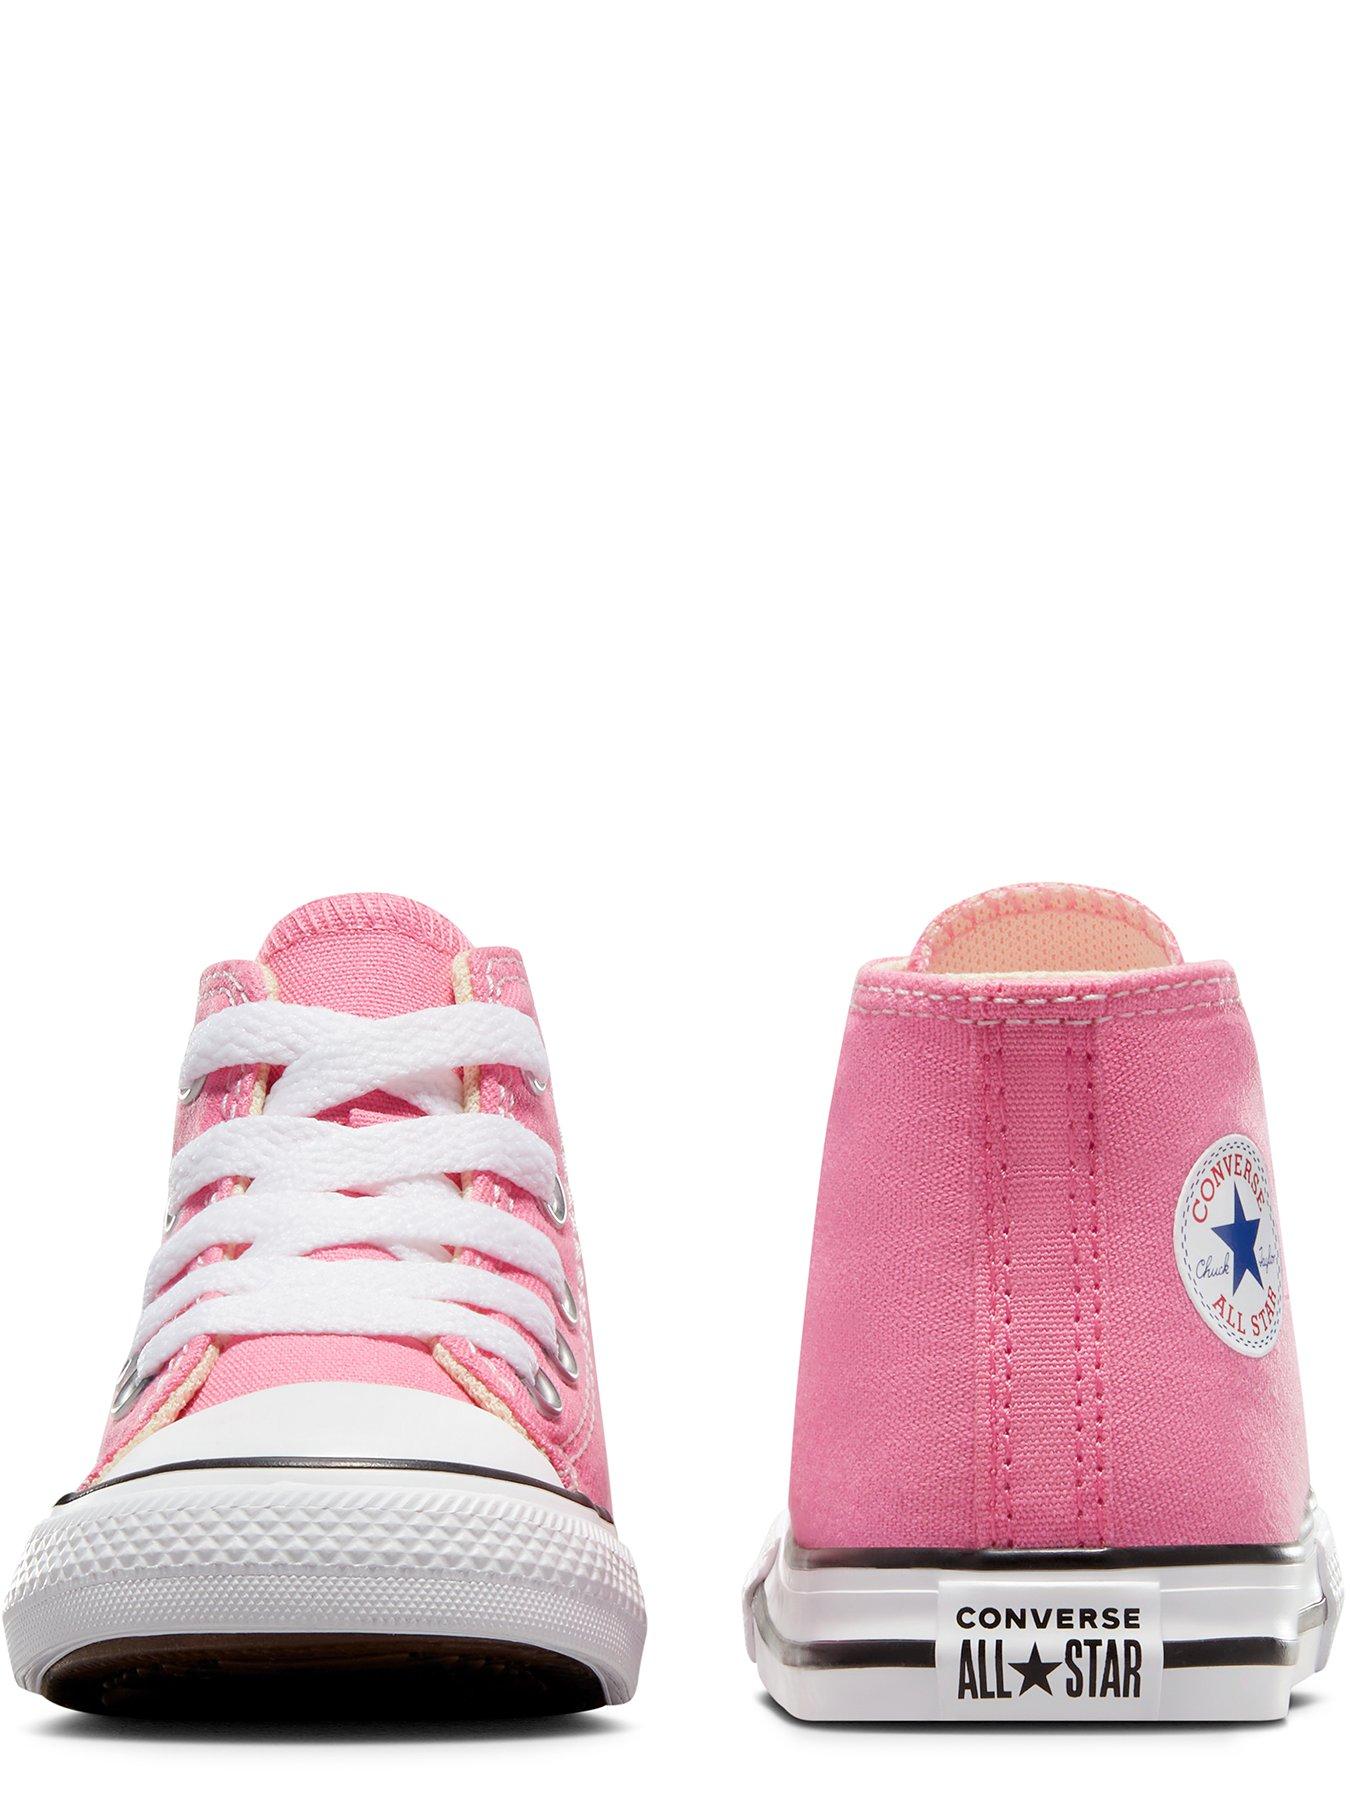 Trainers Chuck Taylor All Star Ox Infant Girls Trainers -Pink